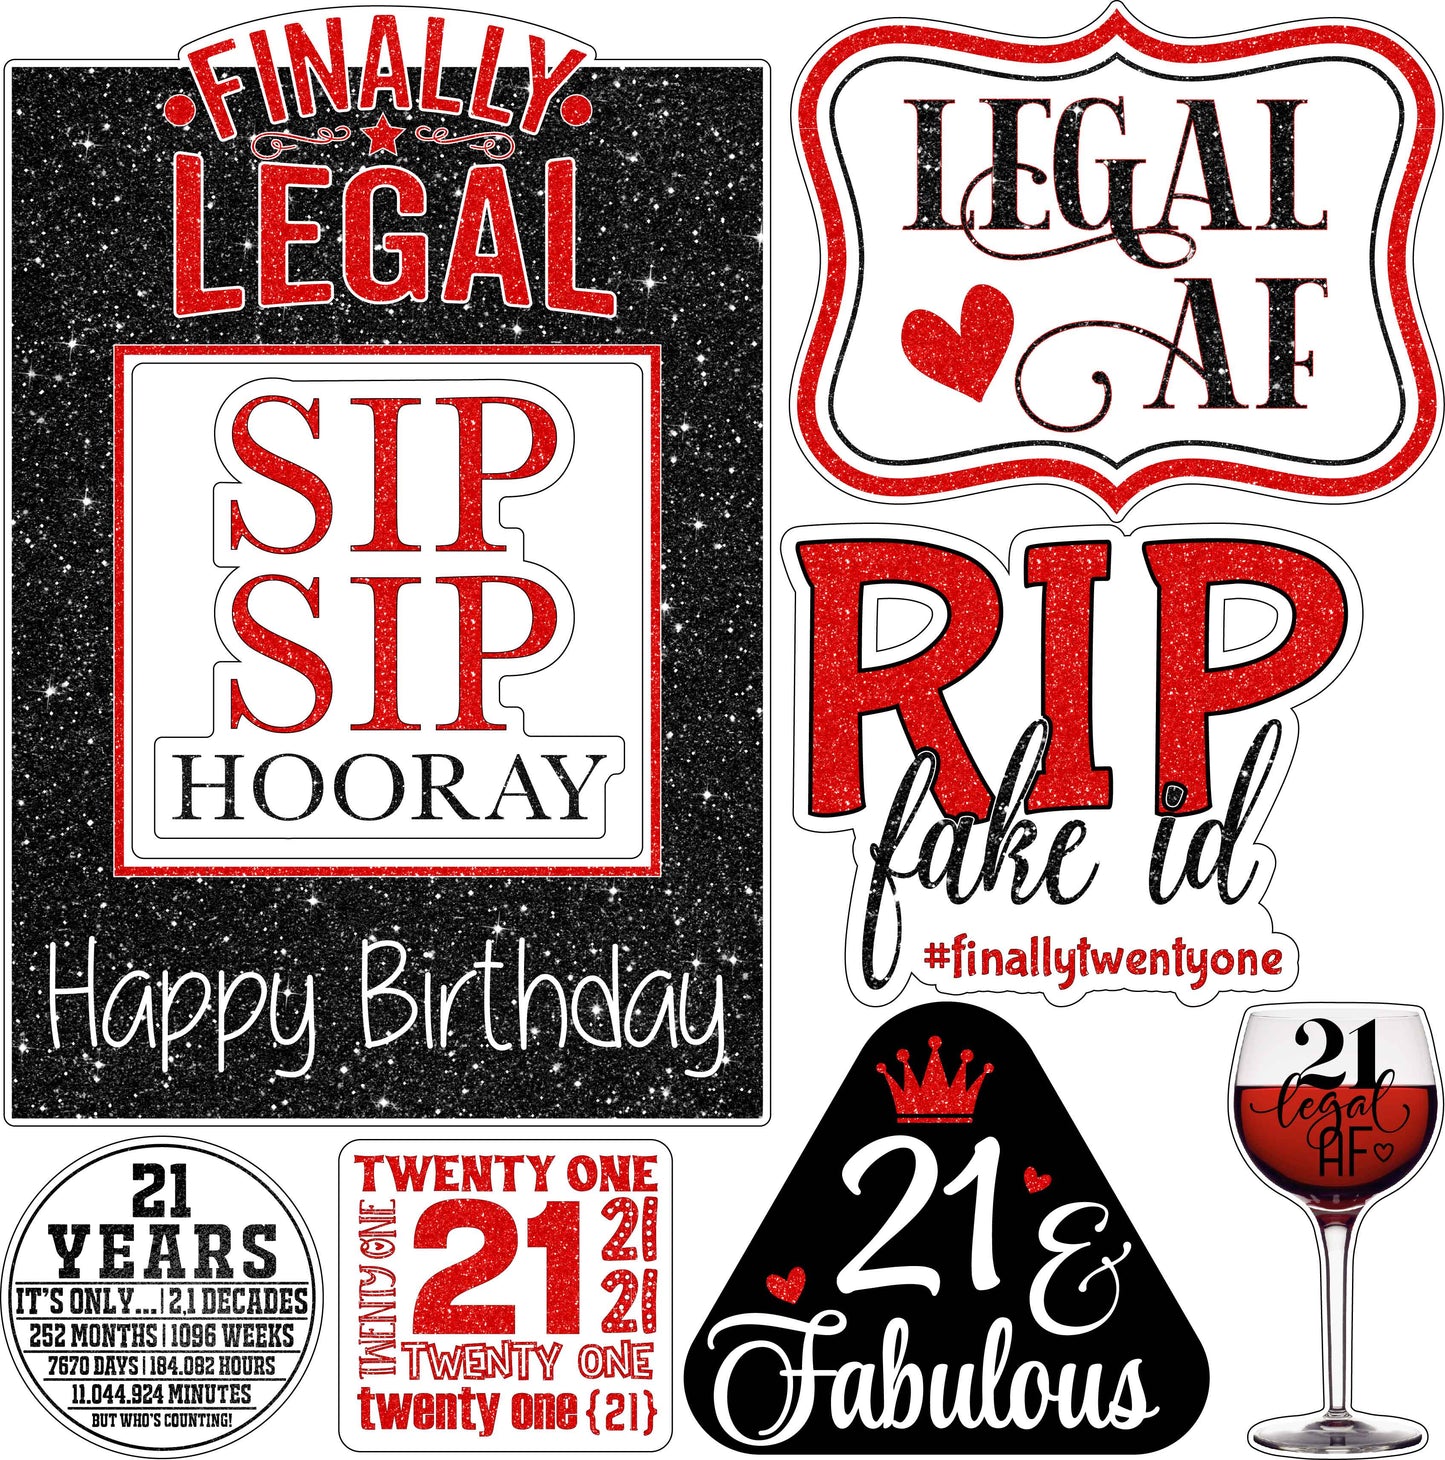 Legally 21 21 St Birthday Theme Half Sheet Misc. (Must Purchase 2 Half sheets - You Can Mix & Match)